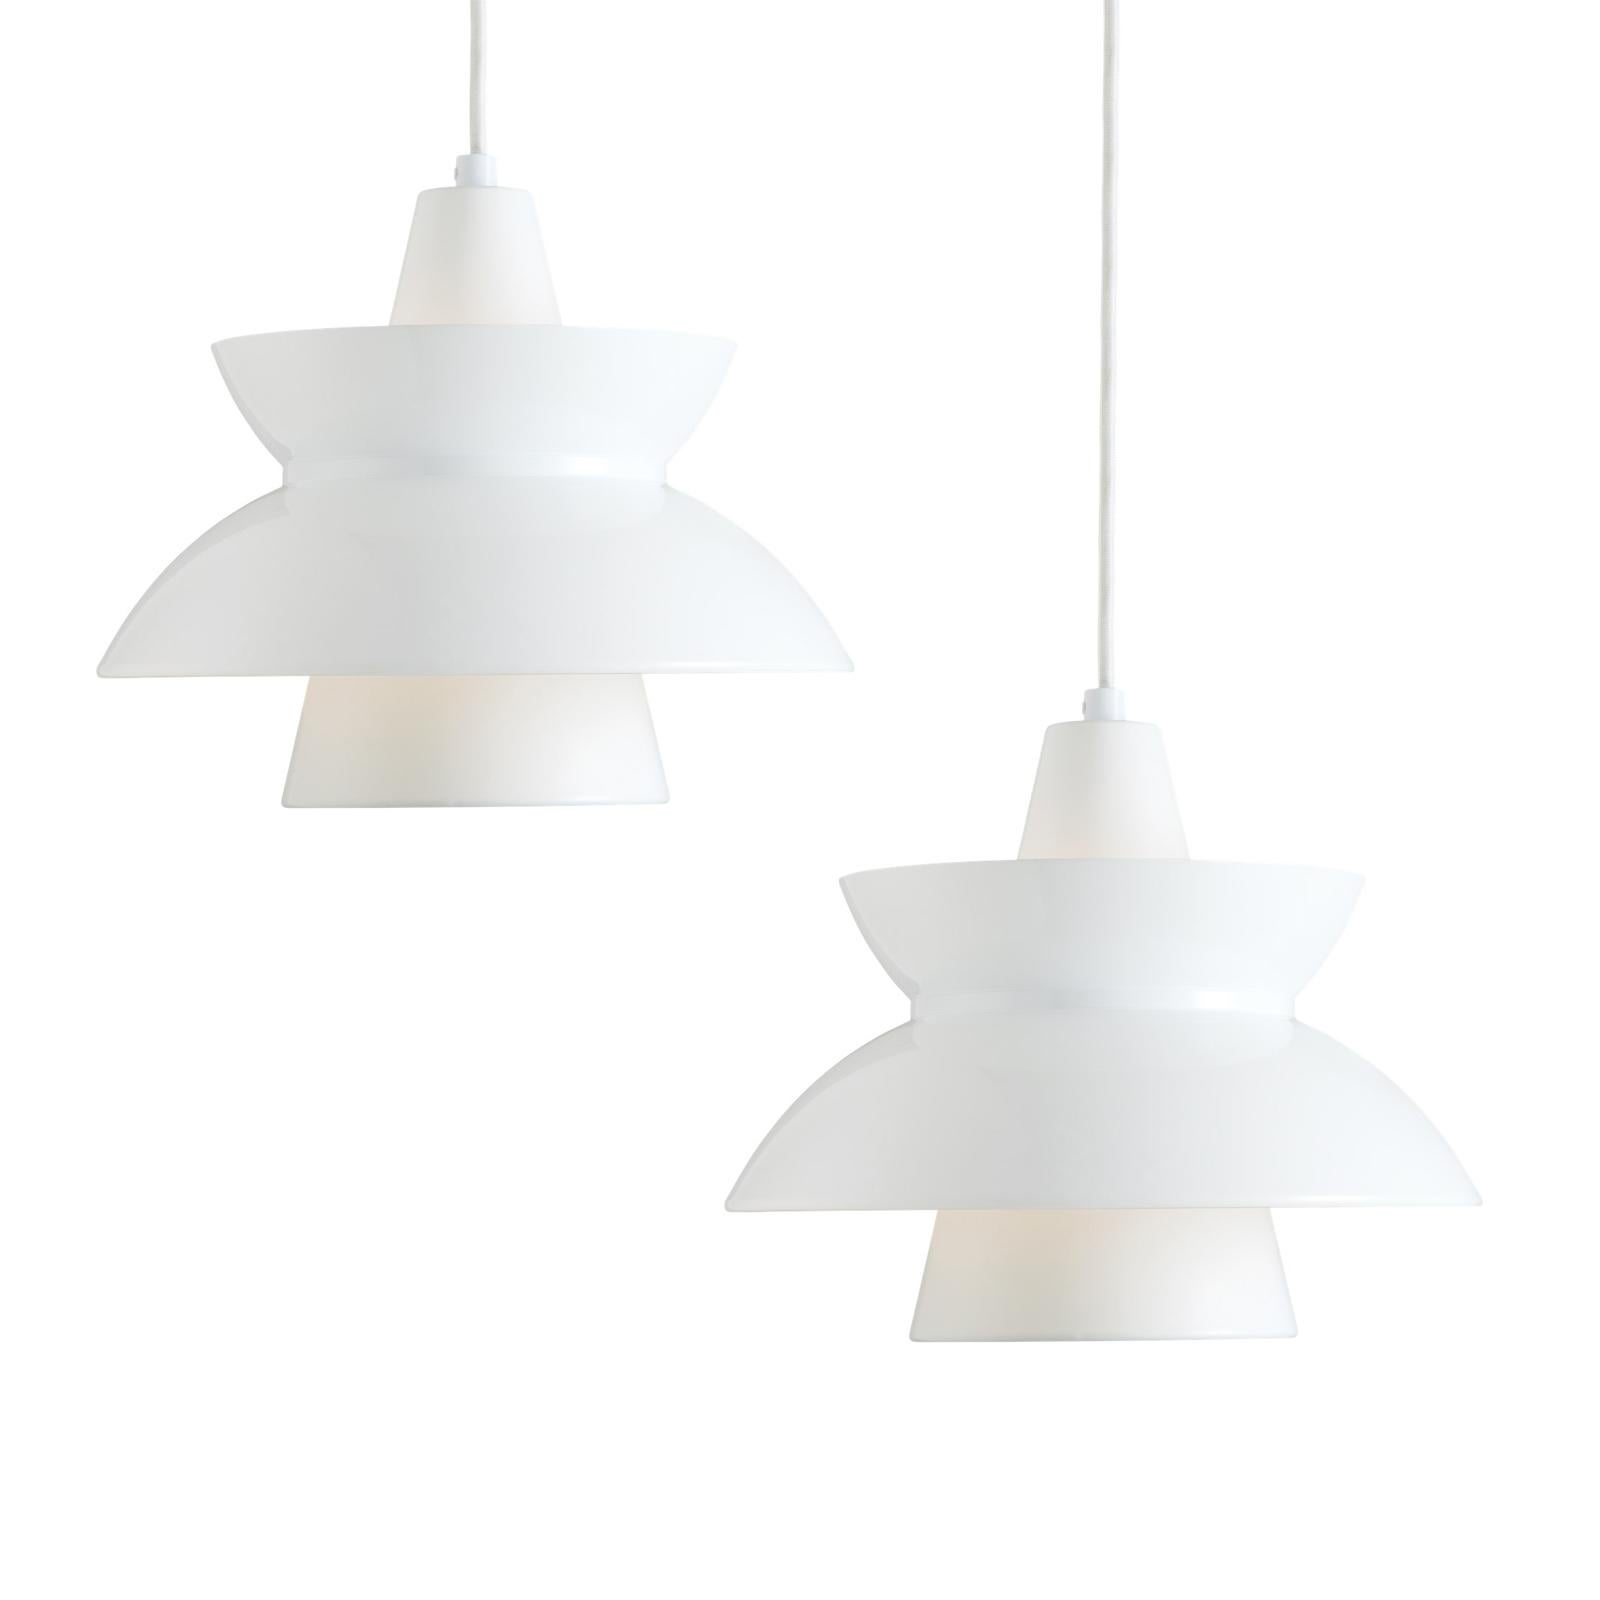 Jørn Utzon 'Doo-Wop' pendant for Louis Poulsen in white. Designed in the 1950s and re-editioned in 2016. Available in both white and dark gray. 

Price is per item. 

Originally introduced in the 1950s, the Doo-Wop pendant light was designed in